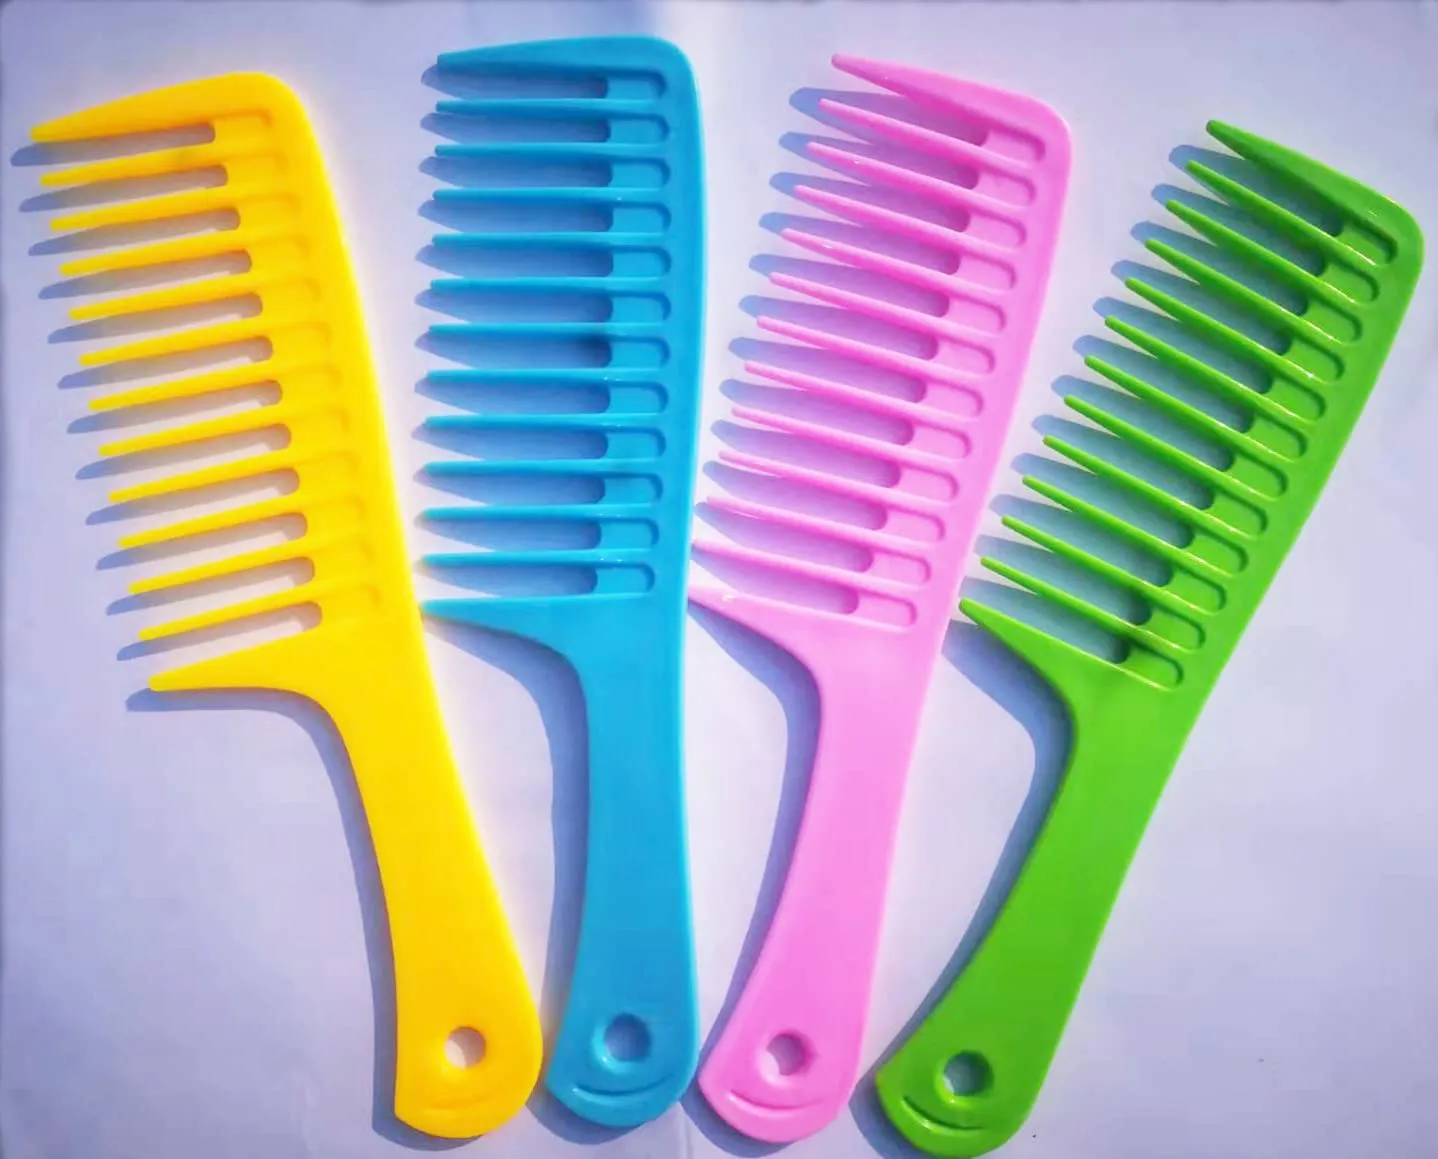 wide tooth comb and large hair detangling comb durable hair brush for best styling and professional hair care suitable for curly hair long hair wet hair in all types 